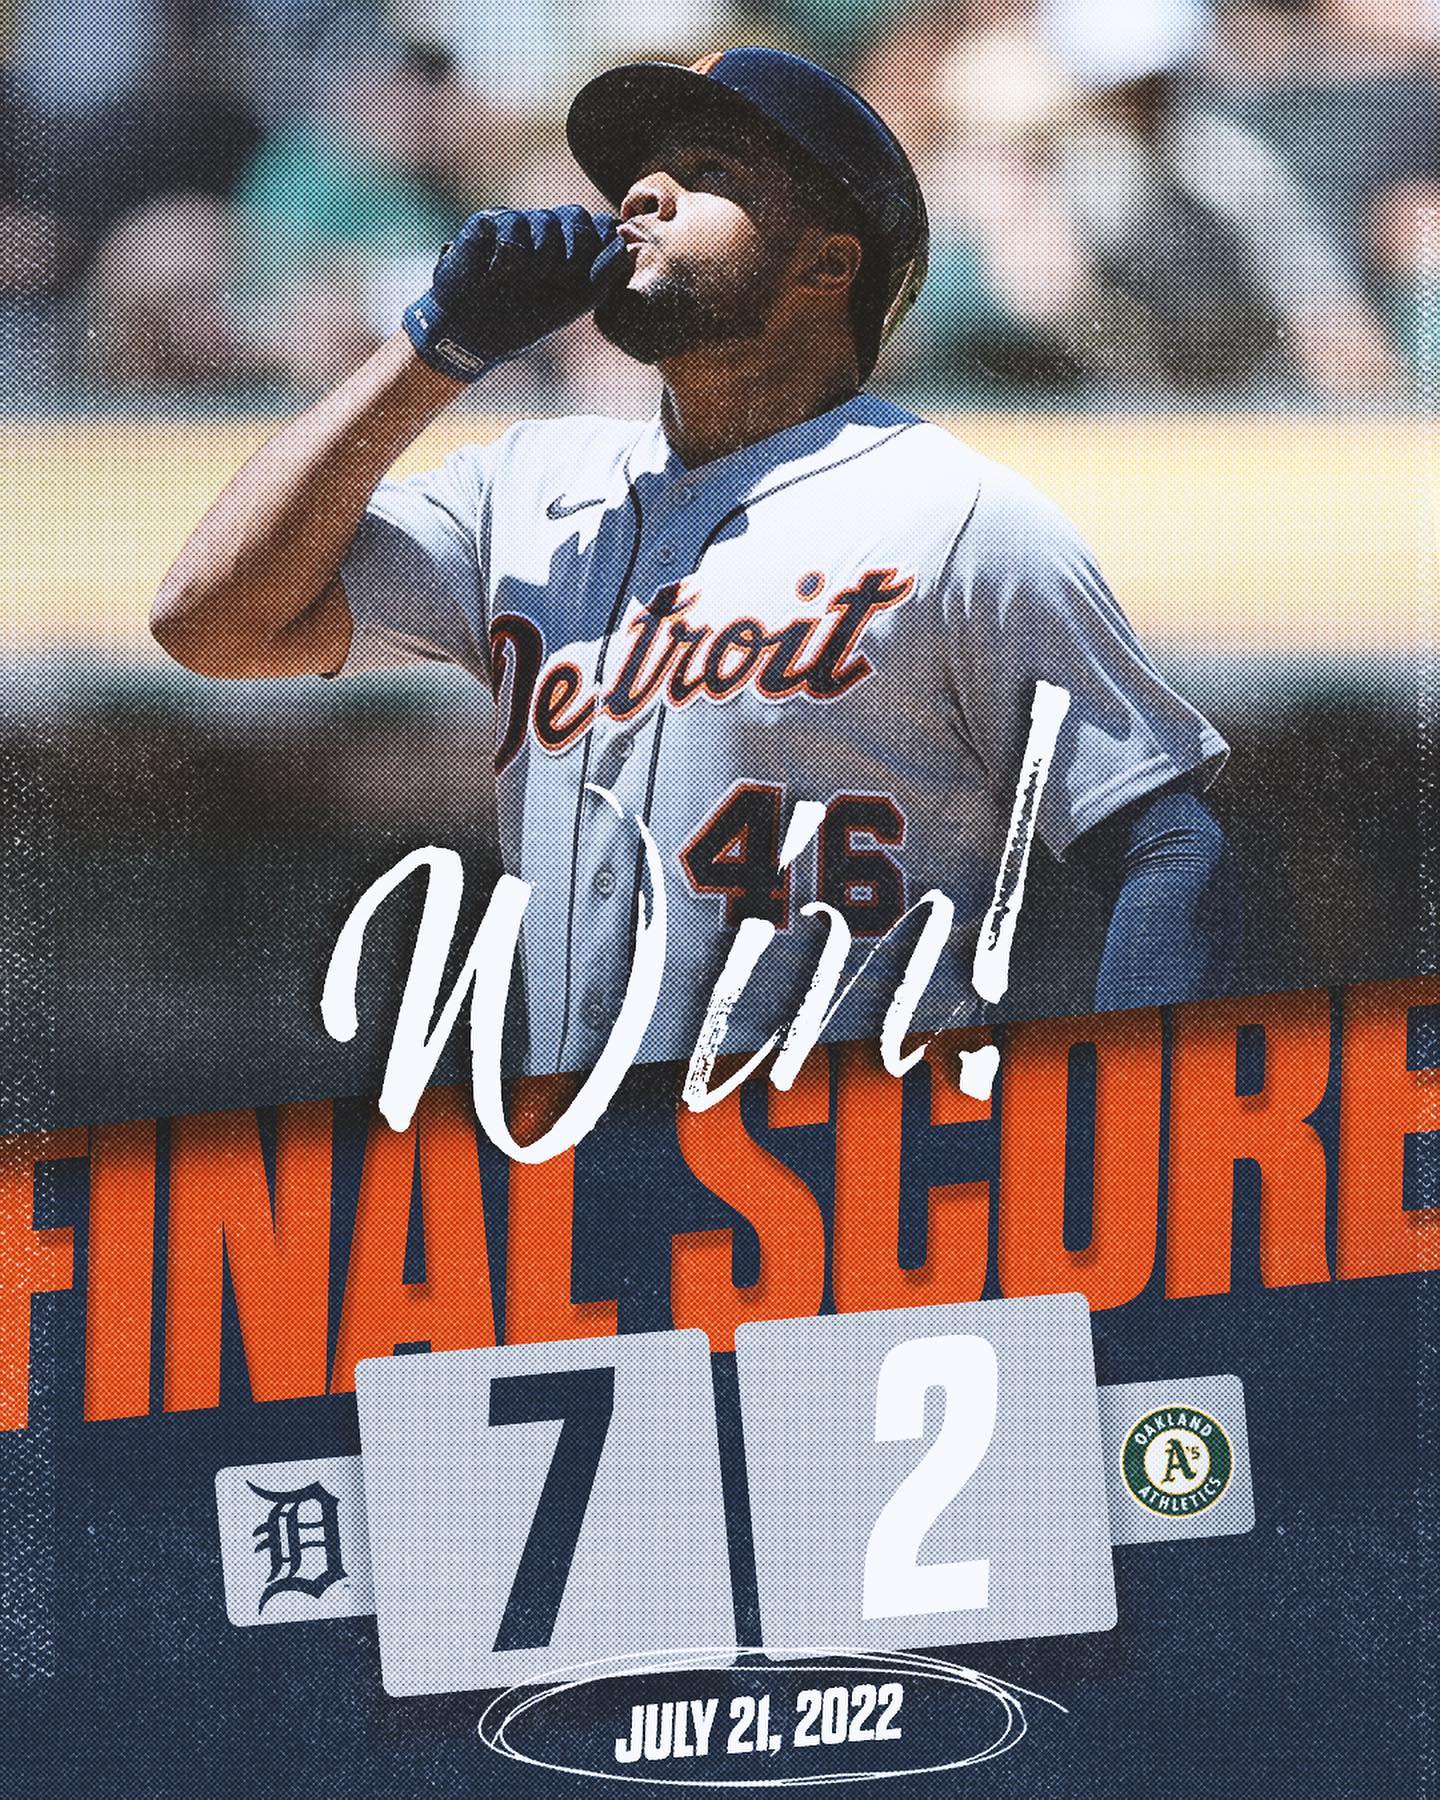 Second half came out swinging. #TigersWin...